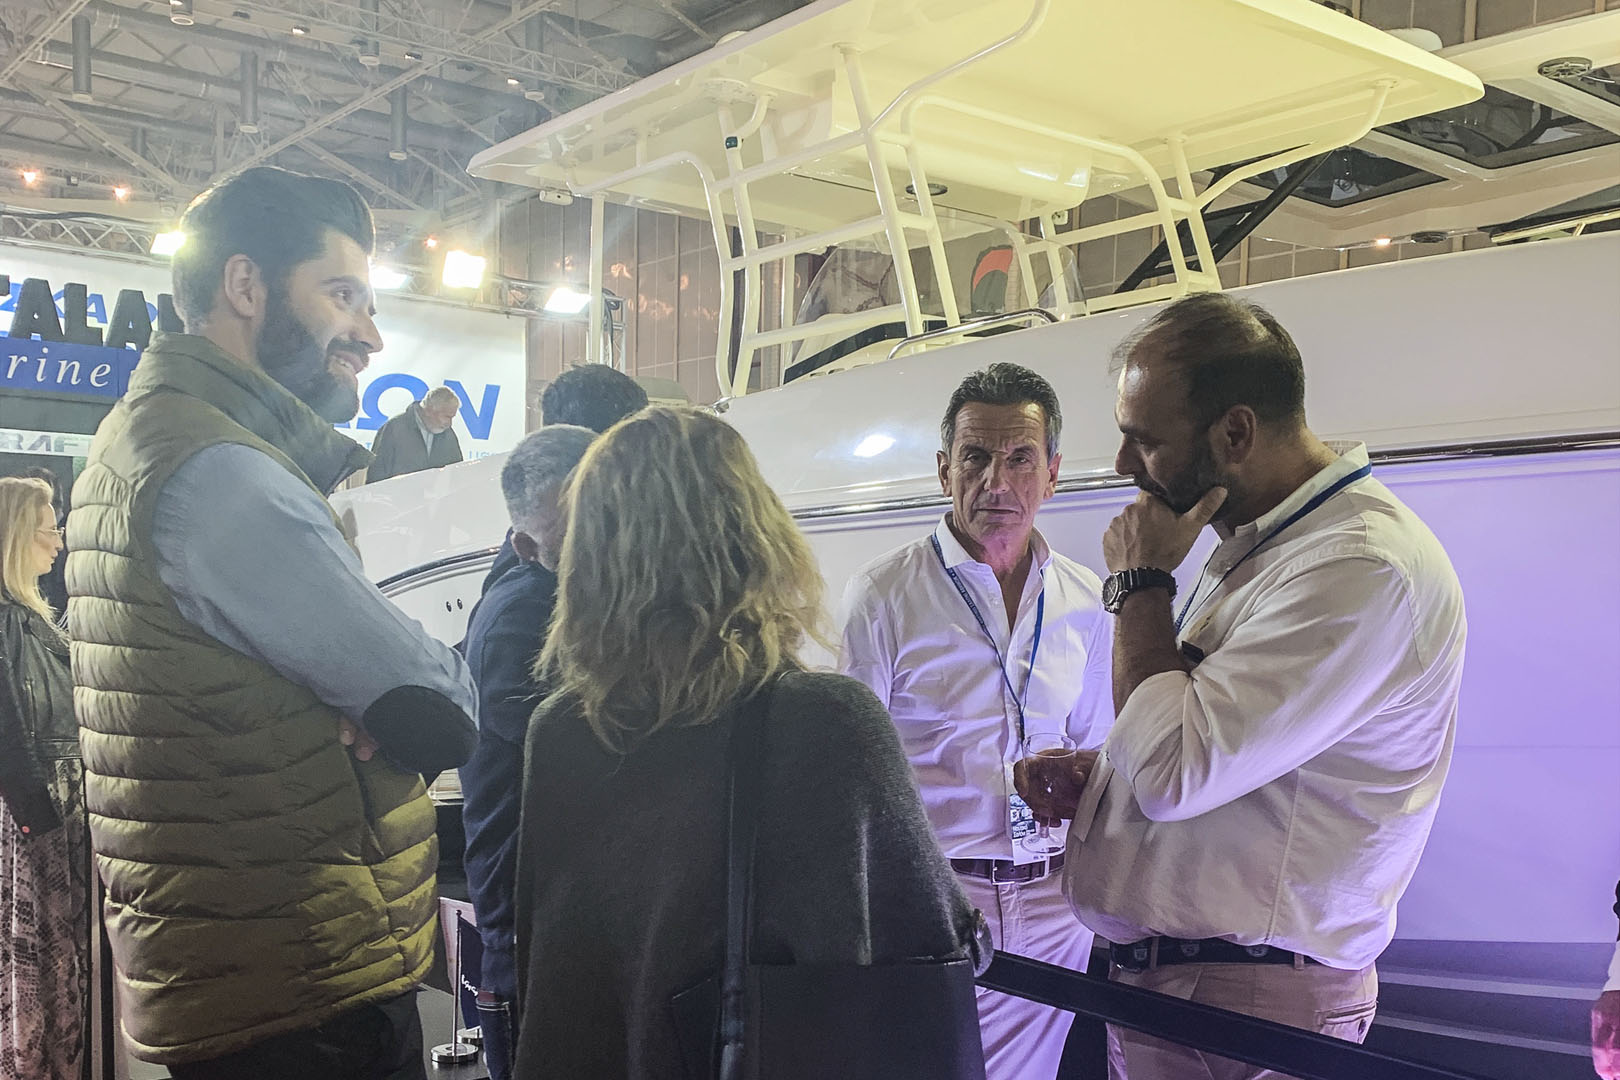 Gulf Craft at Athens Boat Show 2019